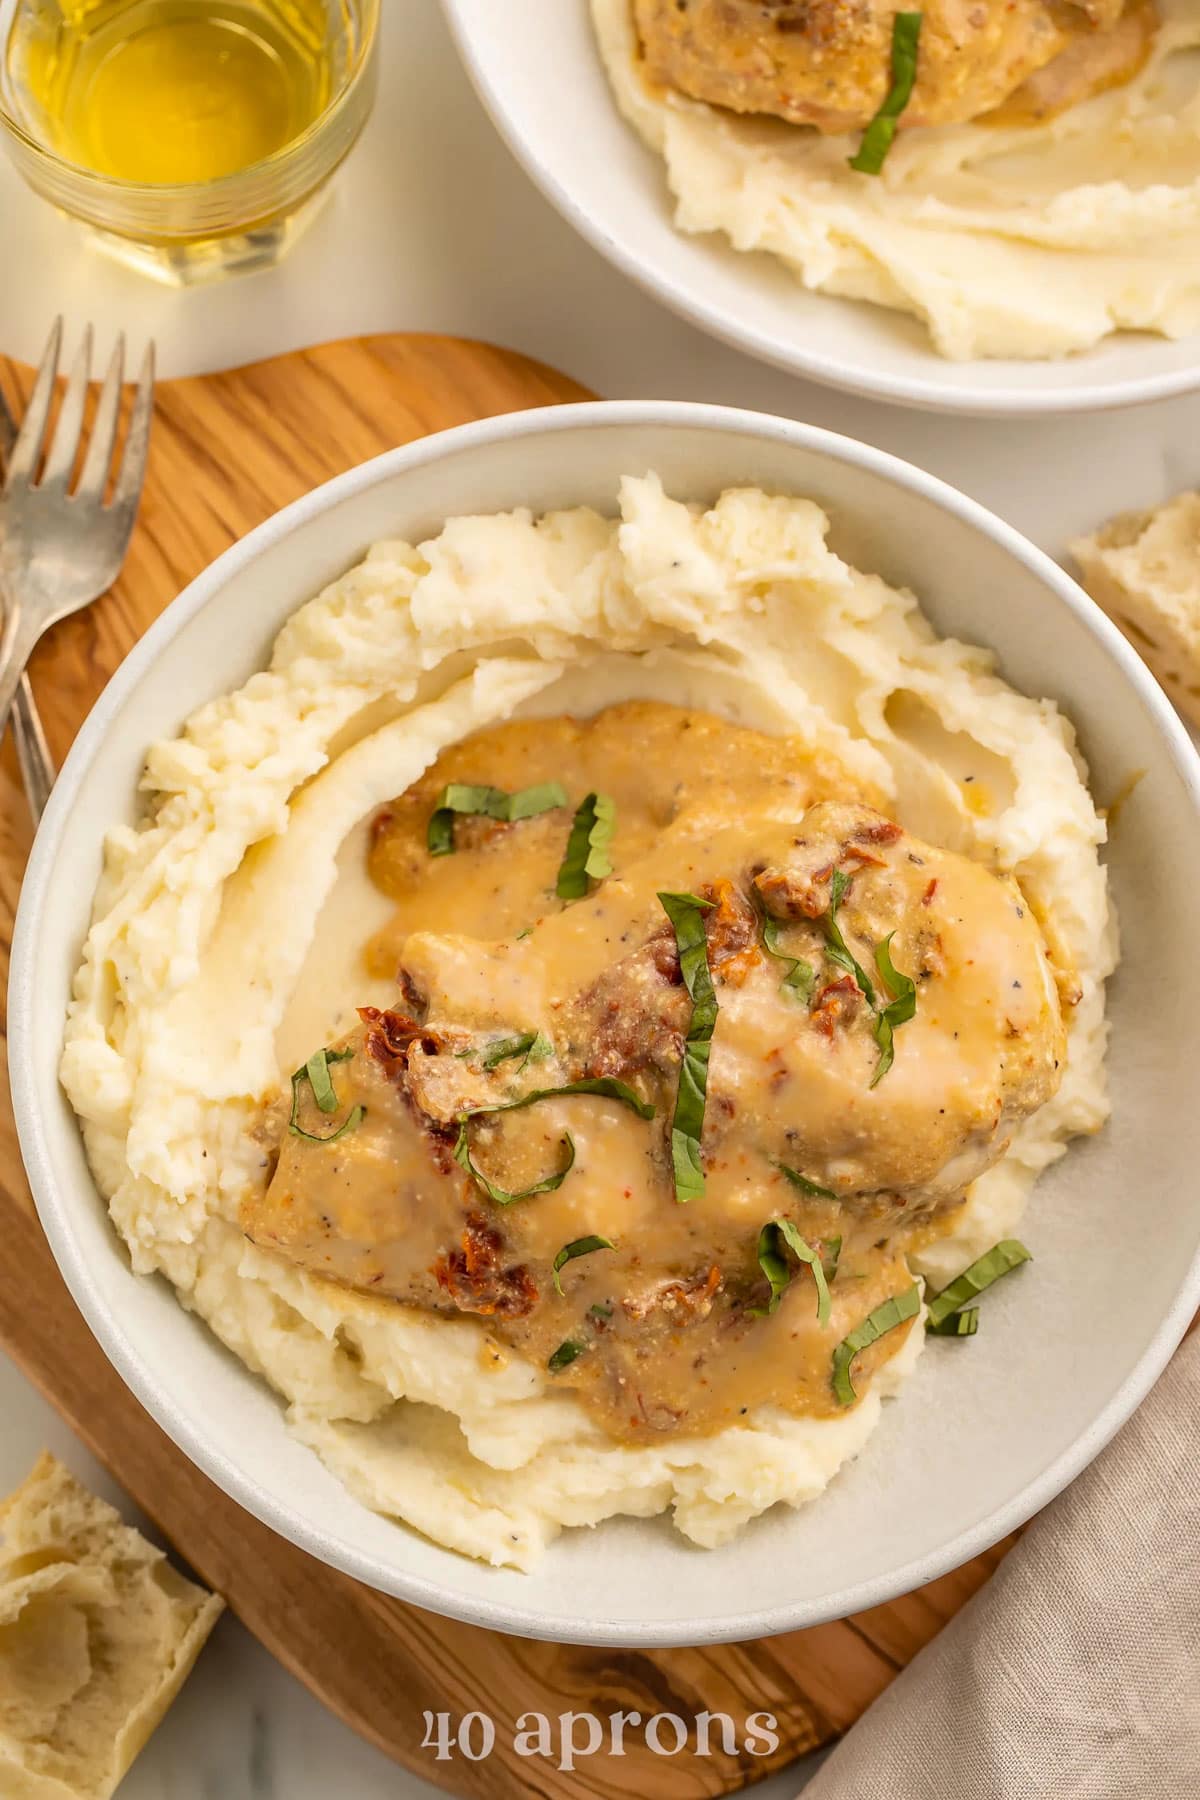 Crockpot marry me chicken topped with basil and sun-dried tomatoes on a bed of mashed potatoes.